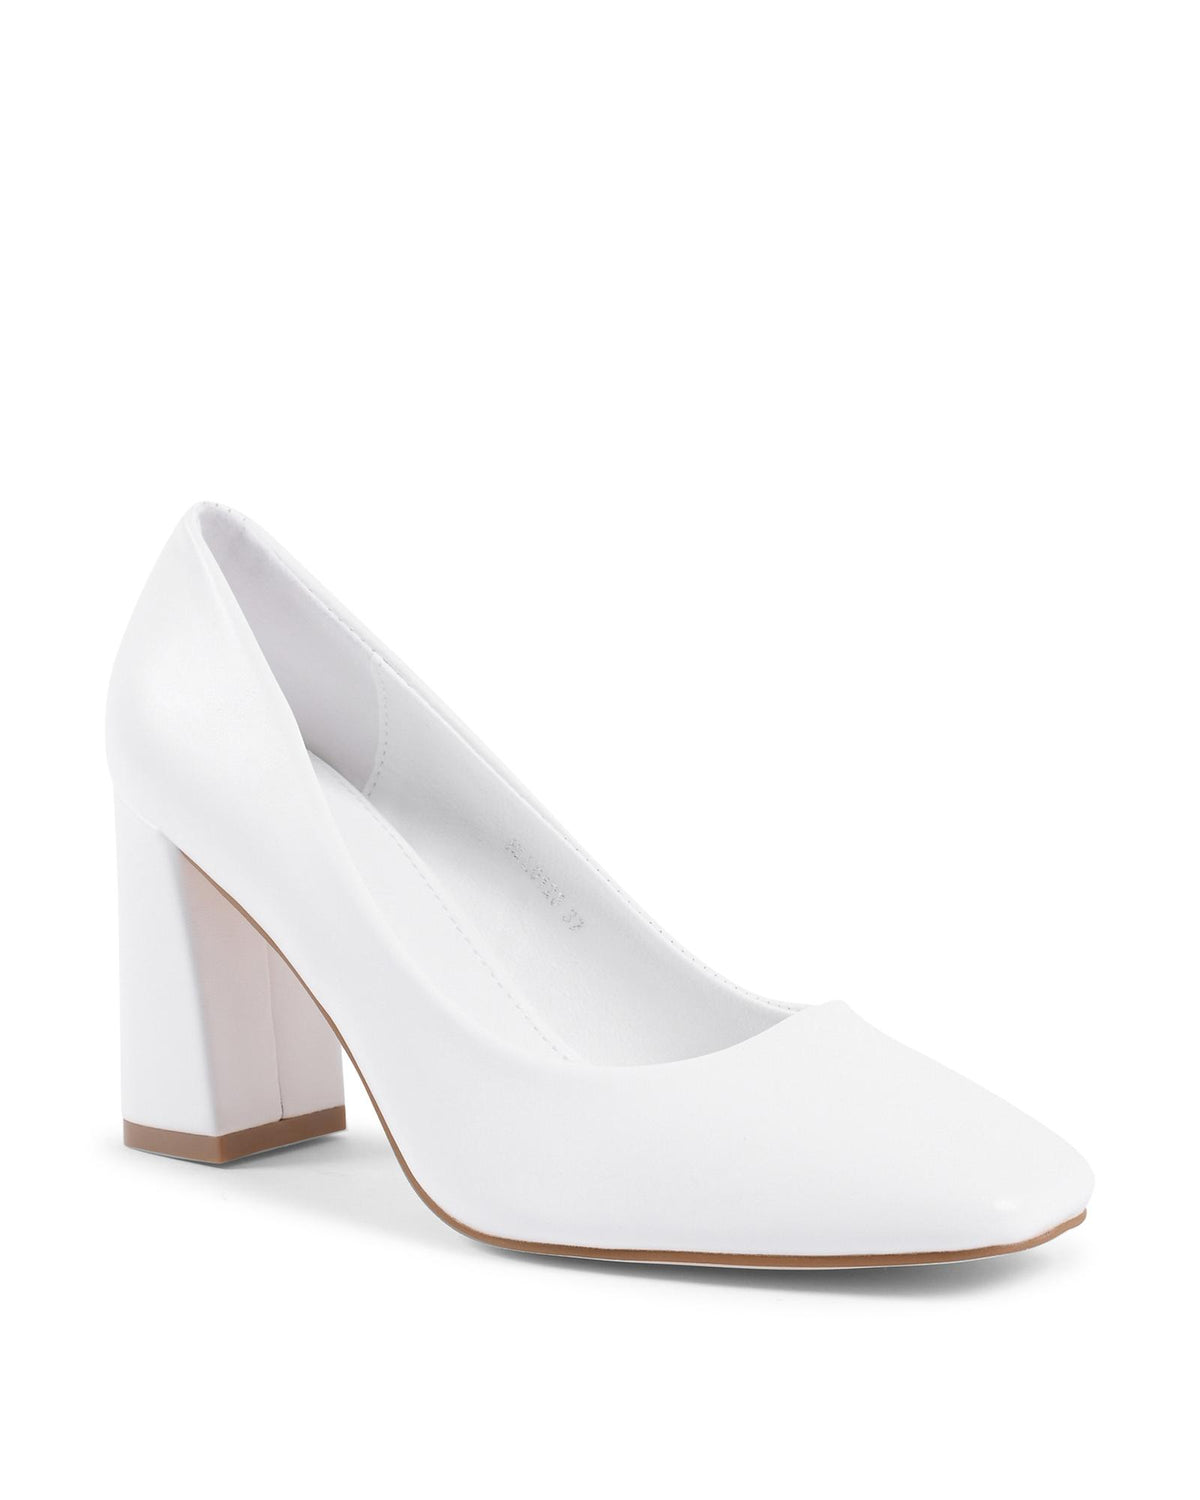 Synthetic Leather Pump with 8 cm Heel - 36 EU